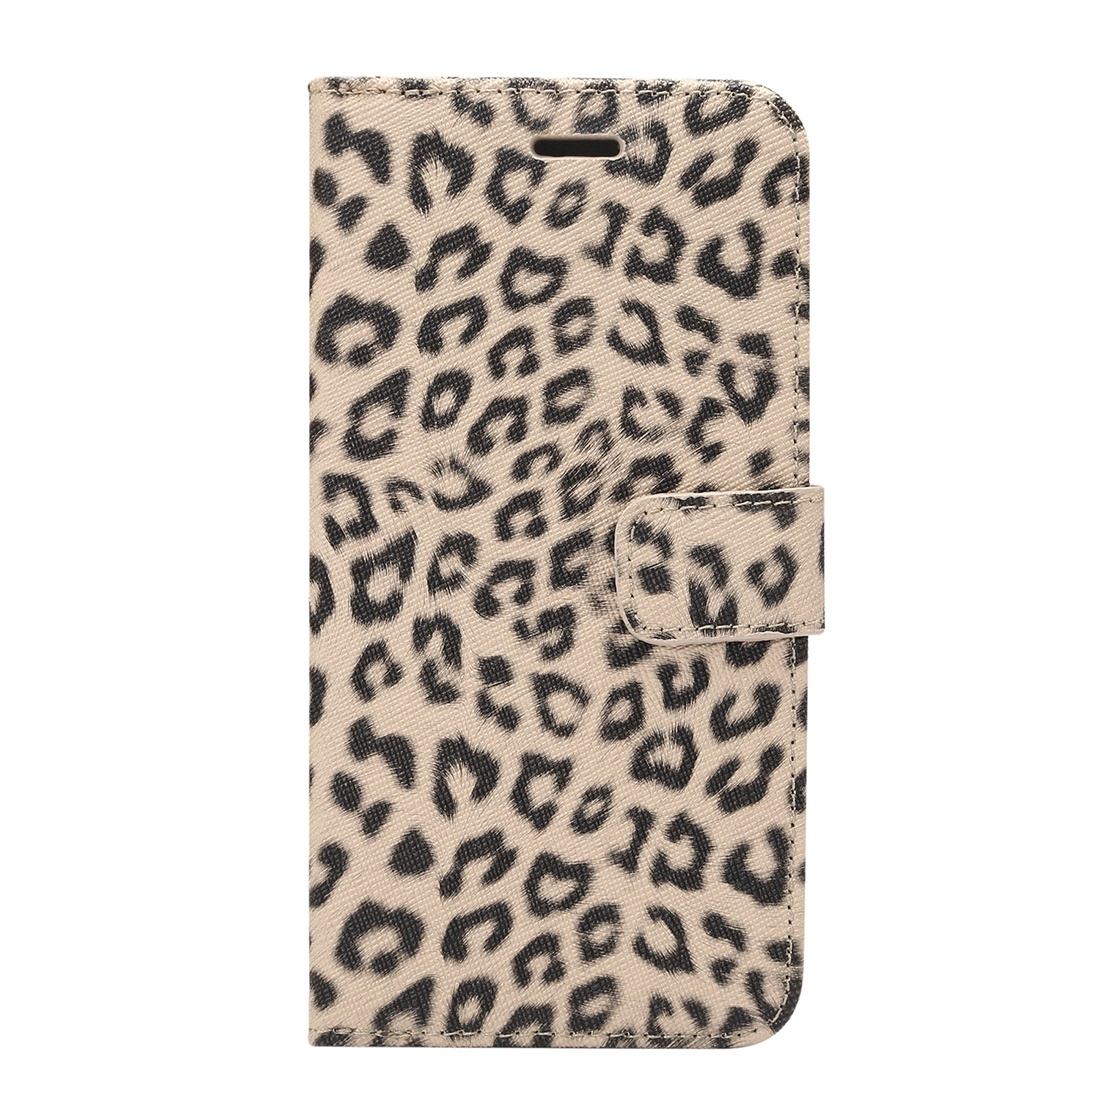 For Samsung Galaxy S9 PLUS Wallet Case, Leopard Pattern Leather Cover,Brown